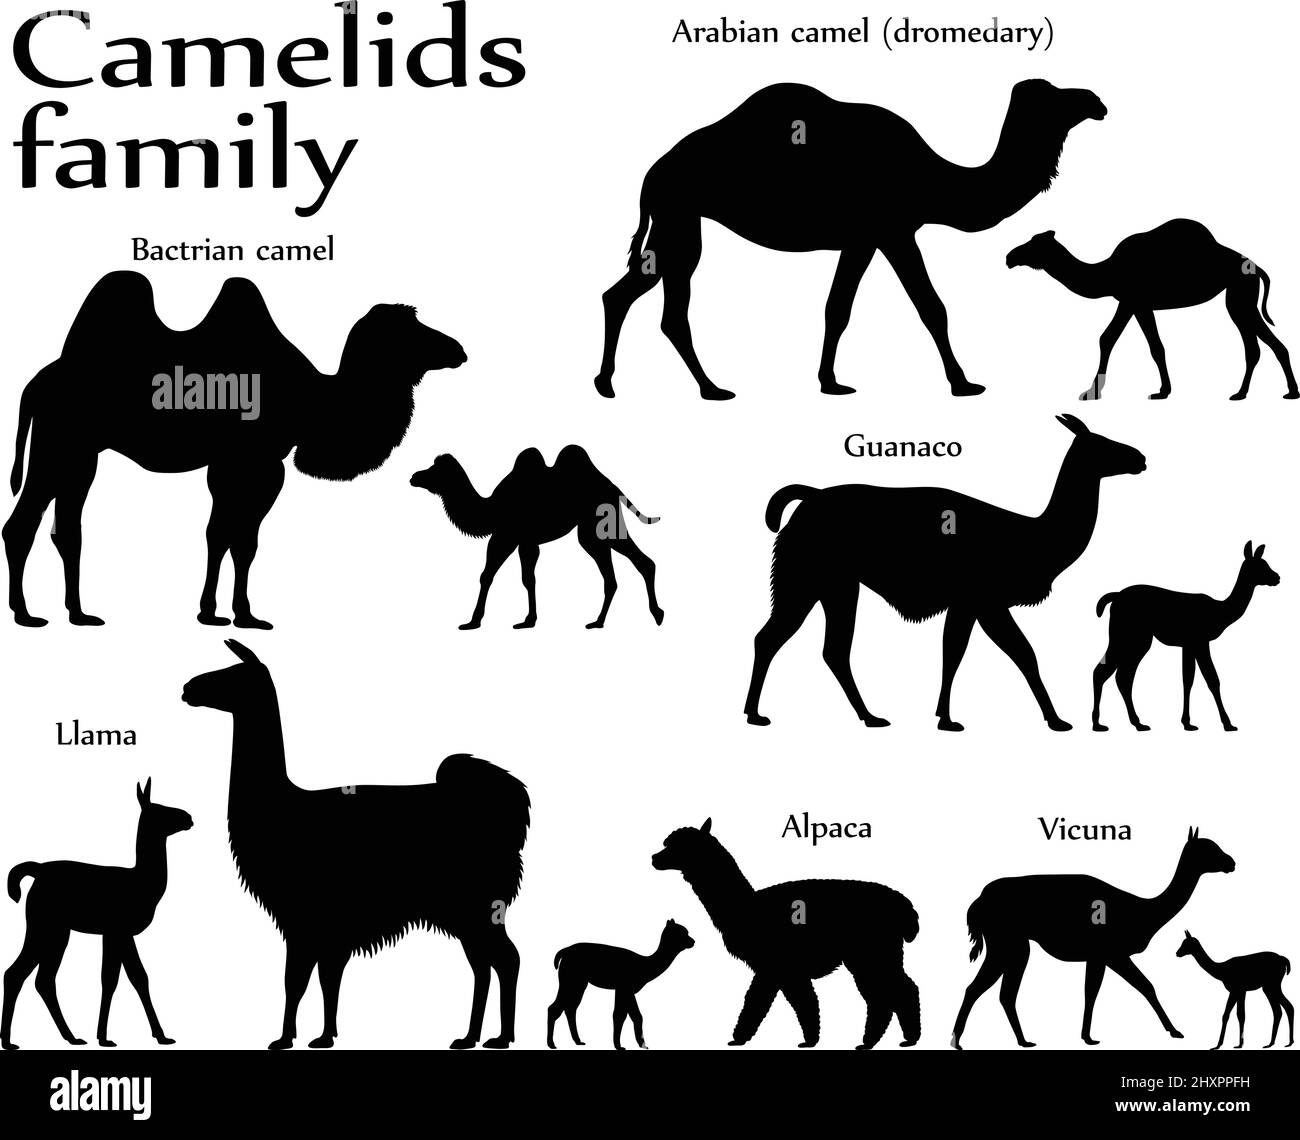 Collection of different species of mammals of camel family, adults and cubs, in silhouette: bactrian camel, arabian camel (dromedary), llama, alpaca, Stock Vector